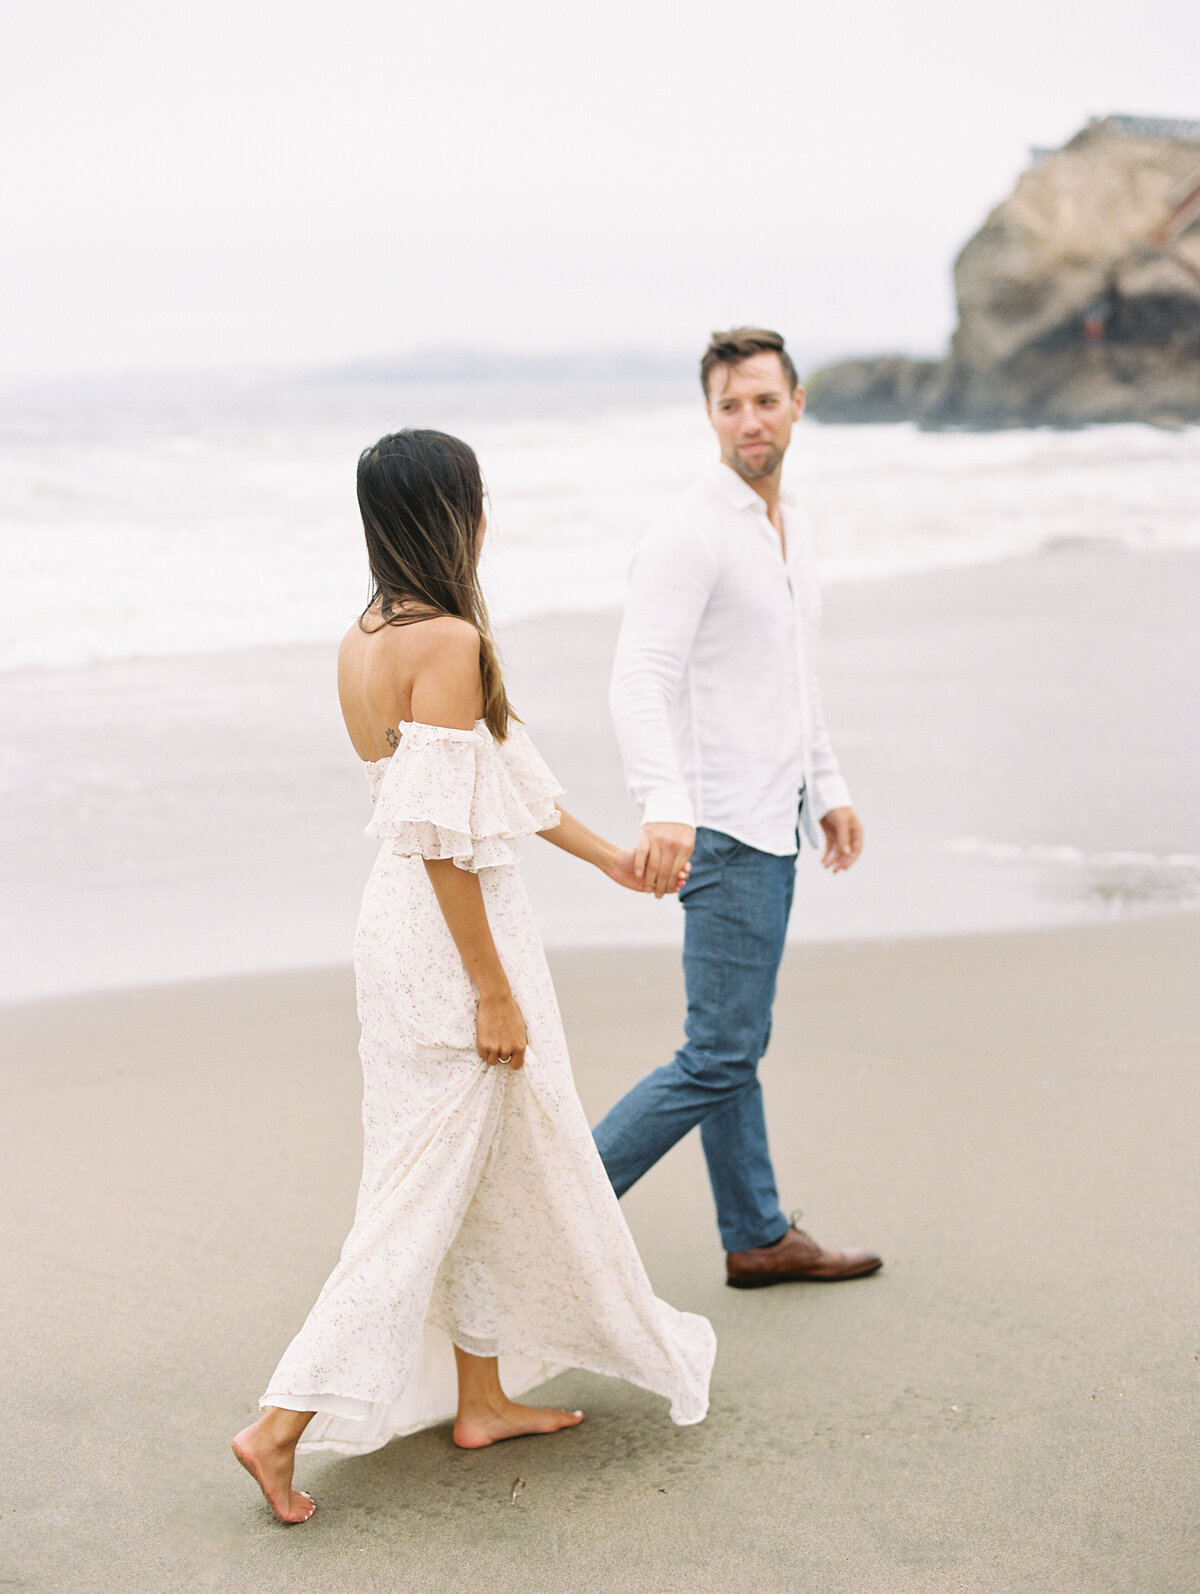 Bride and groom walking on beach photographed by Chicago editorial wedding photographer Arielle Peters